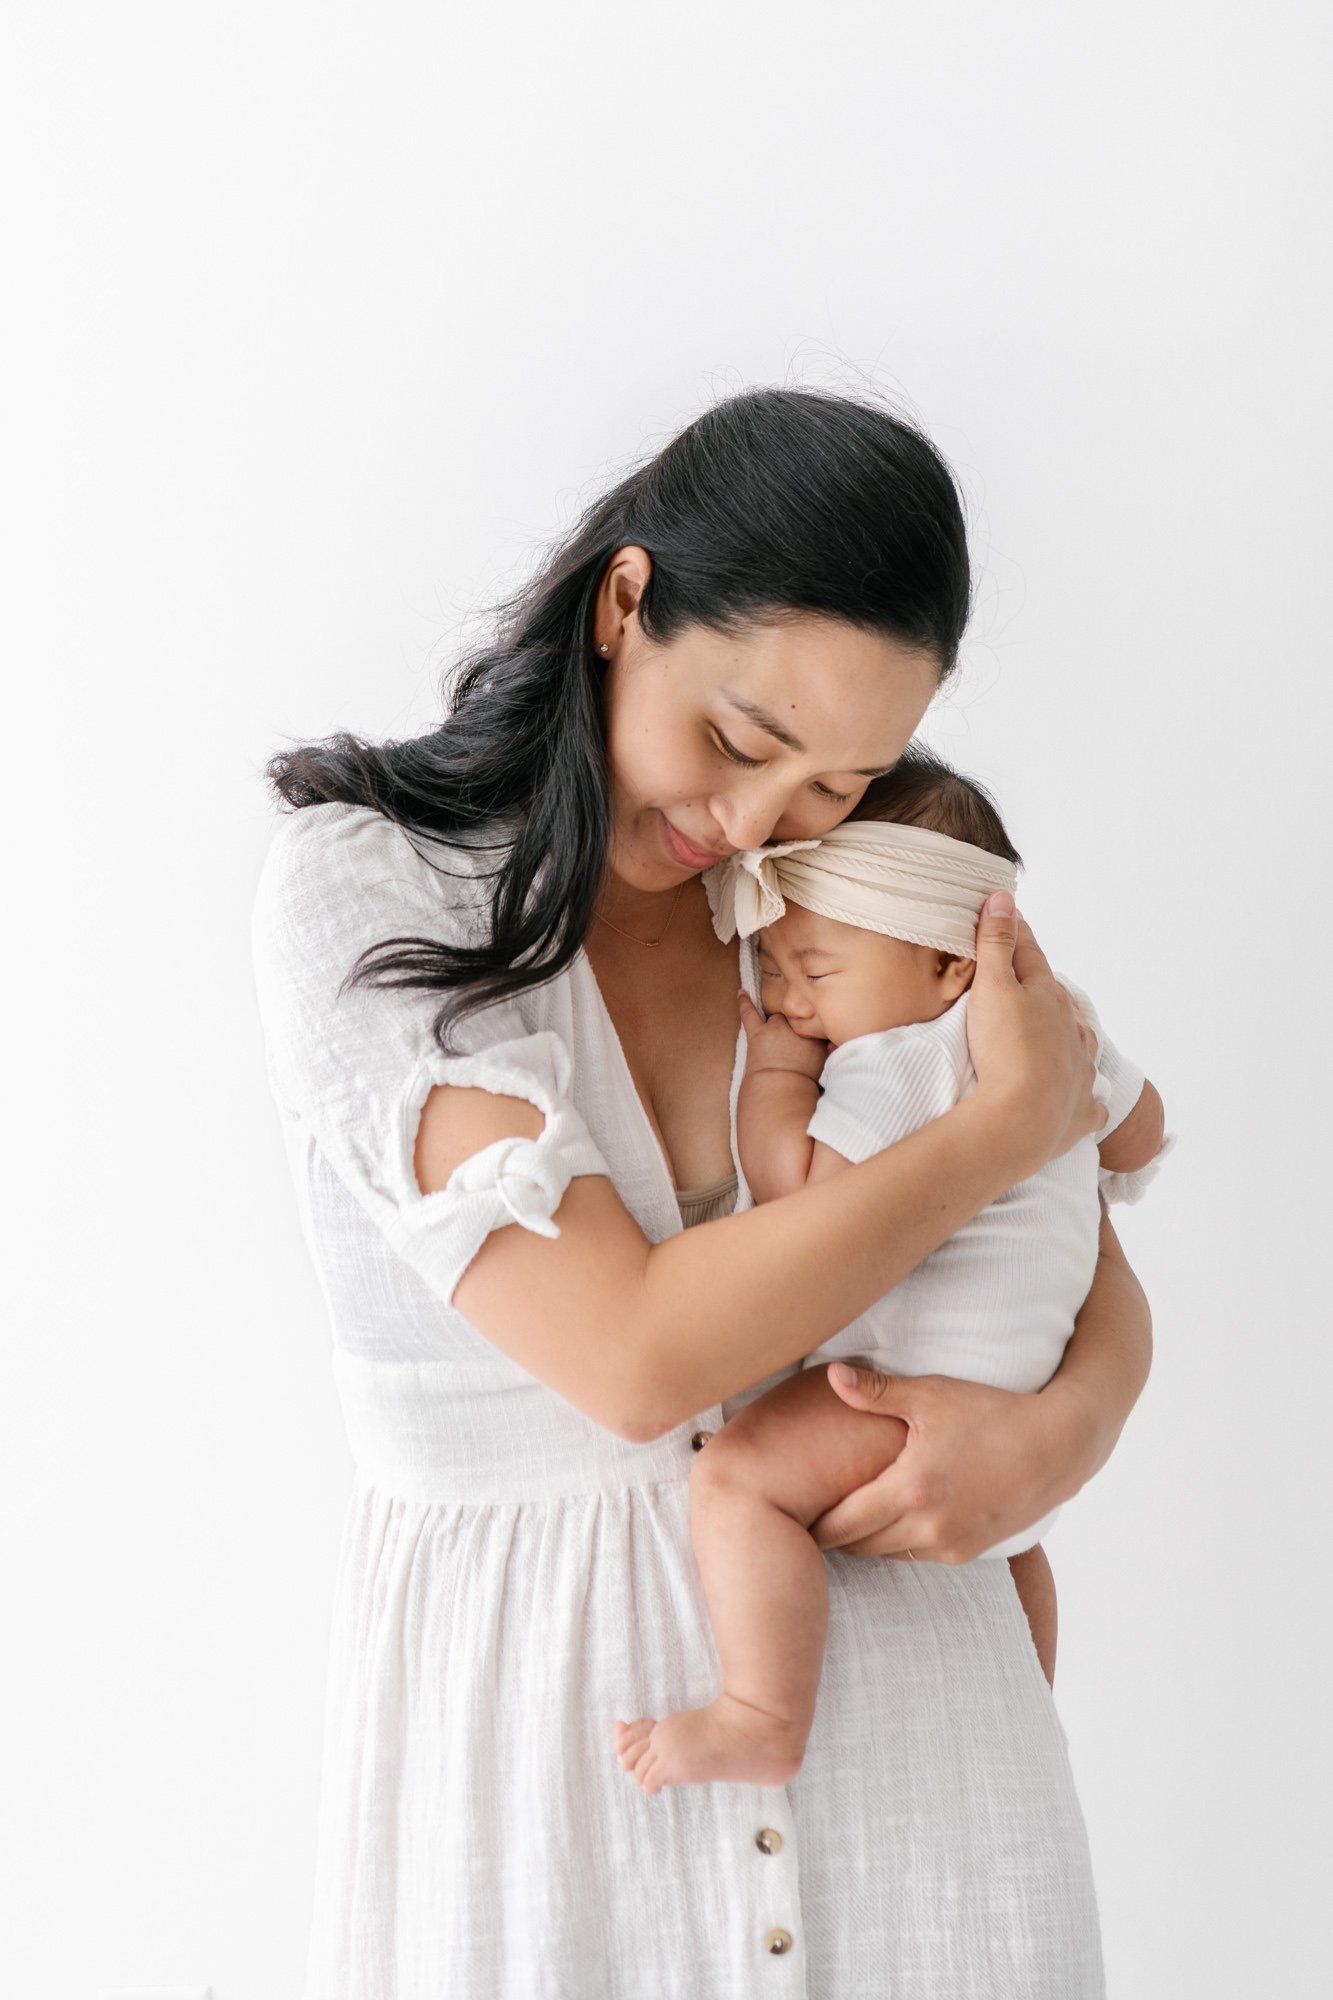    Young mother cradles newborn baby girl in white bow. Happy newborn and happy mother sharing a special moment in New Jersey shot by Nicole Hawkins Photography #studionewborns #studioportraits #babystudioportraits #NewJerseyPhotographers #NJfamilyph